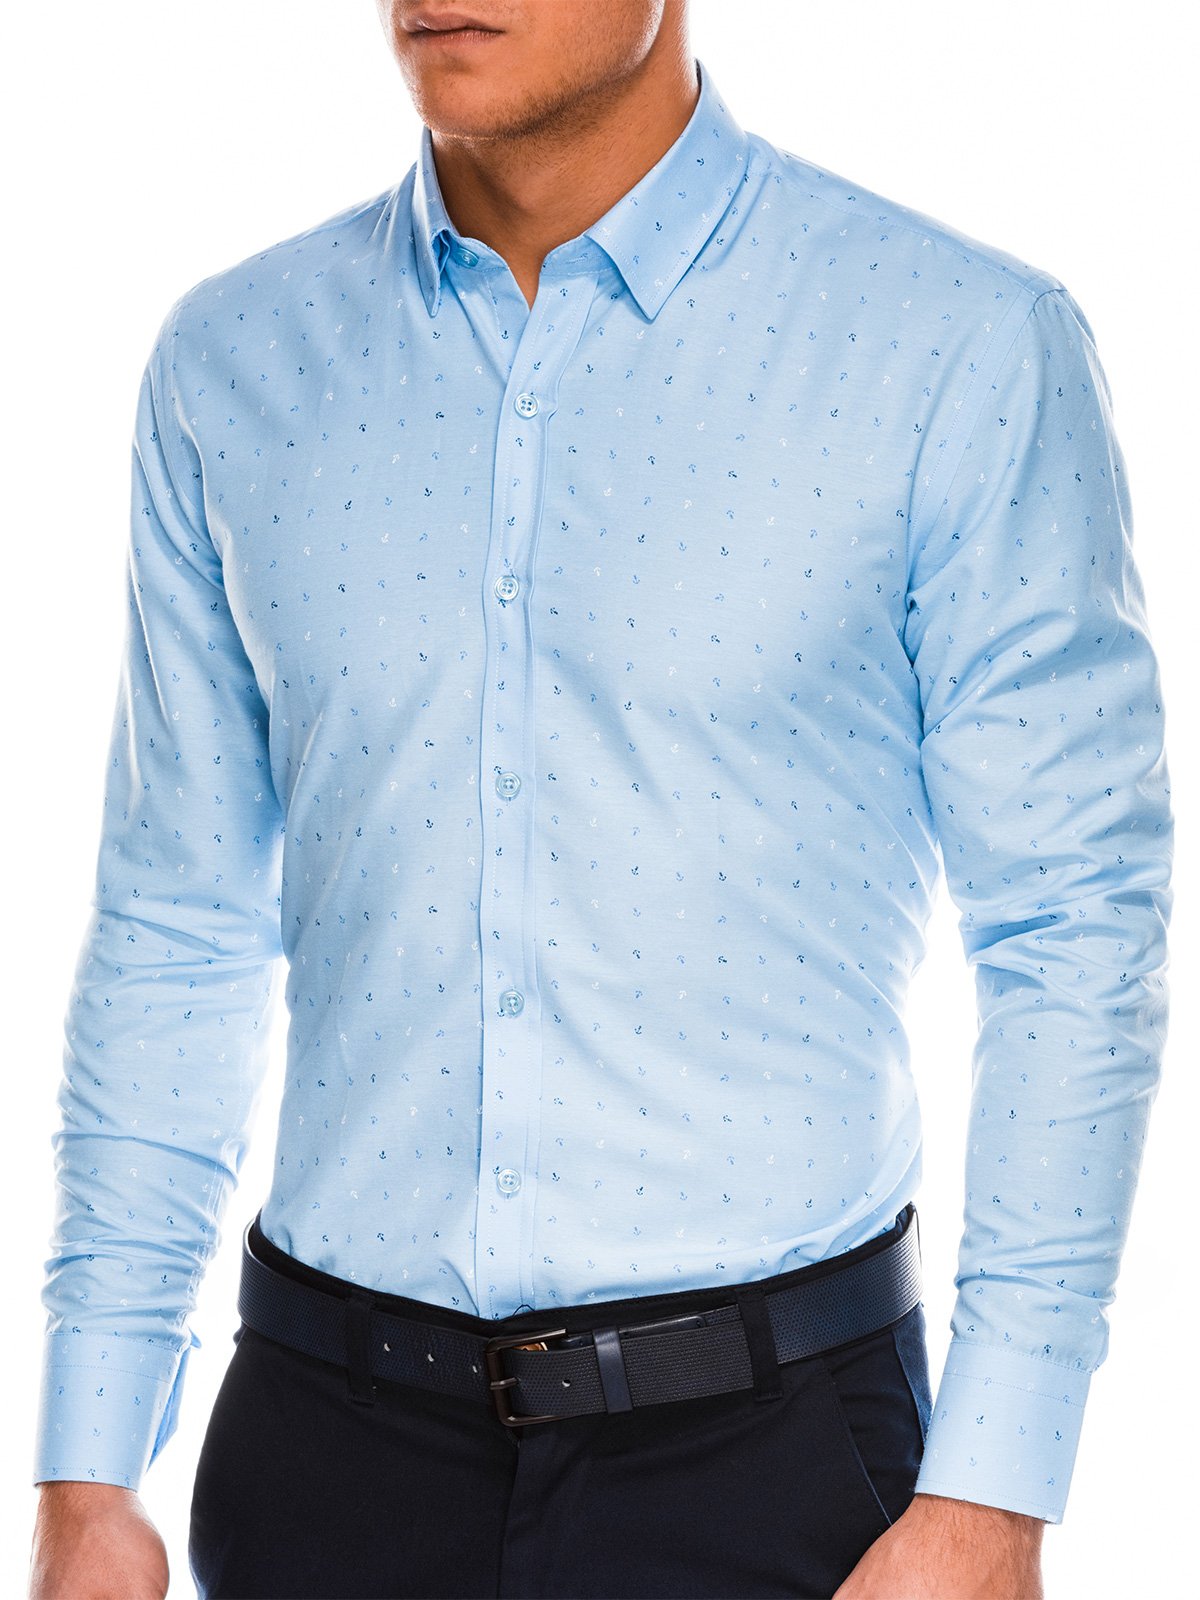 Men's shirt with long sleeves K465 - light blue/navy | MODONE wholesale